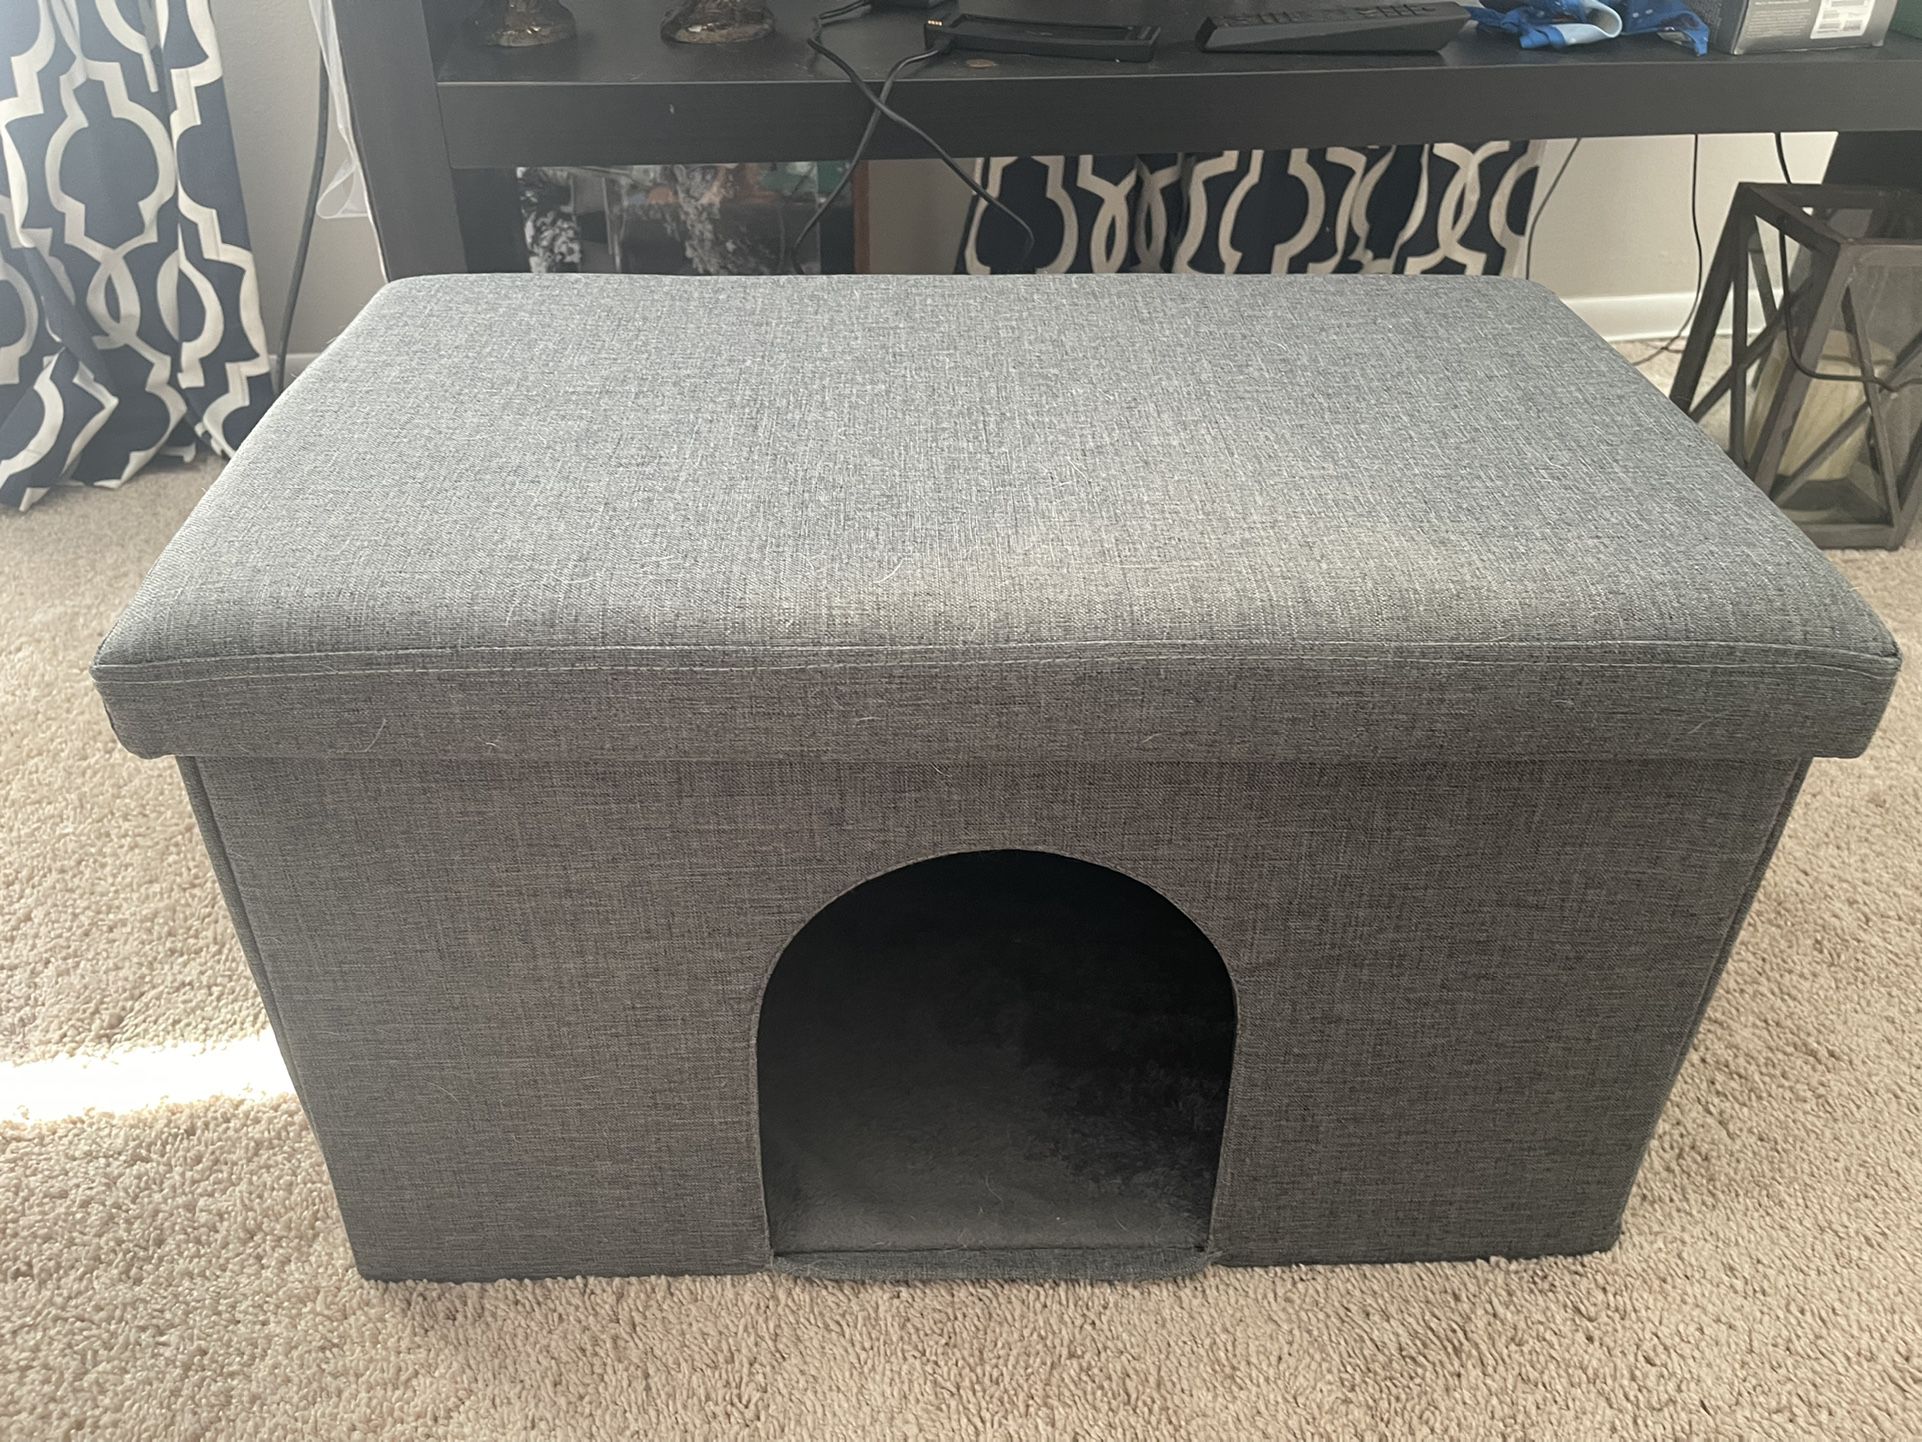 Small Dog Or Cat Collapsible Ottoman 